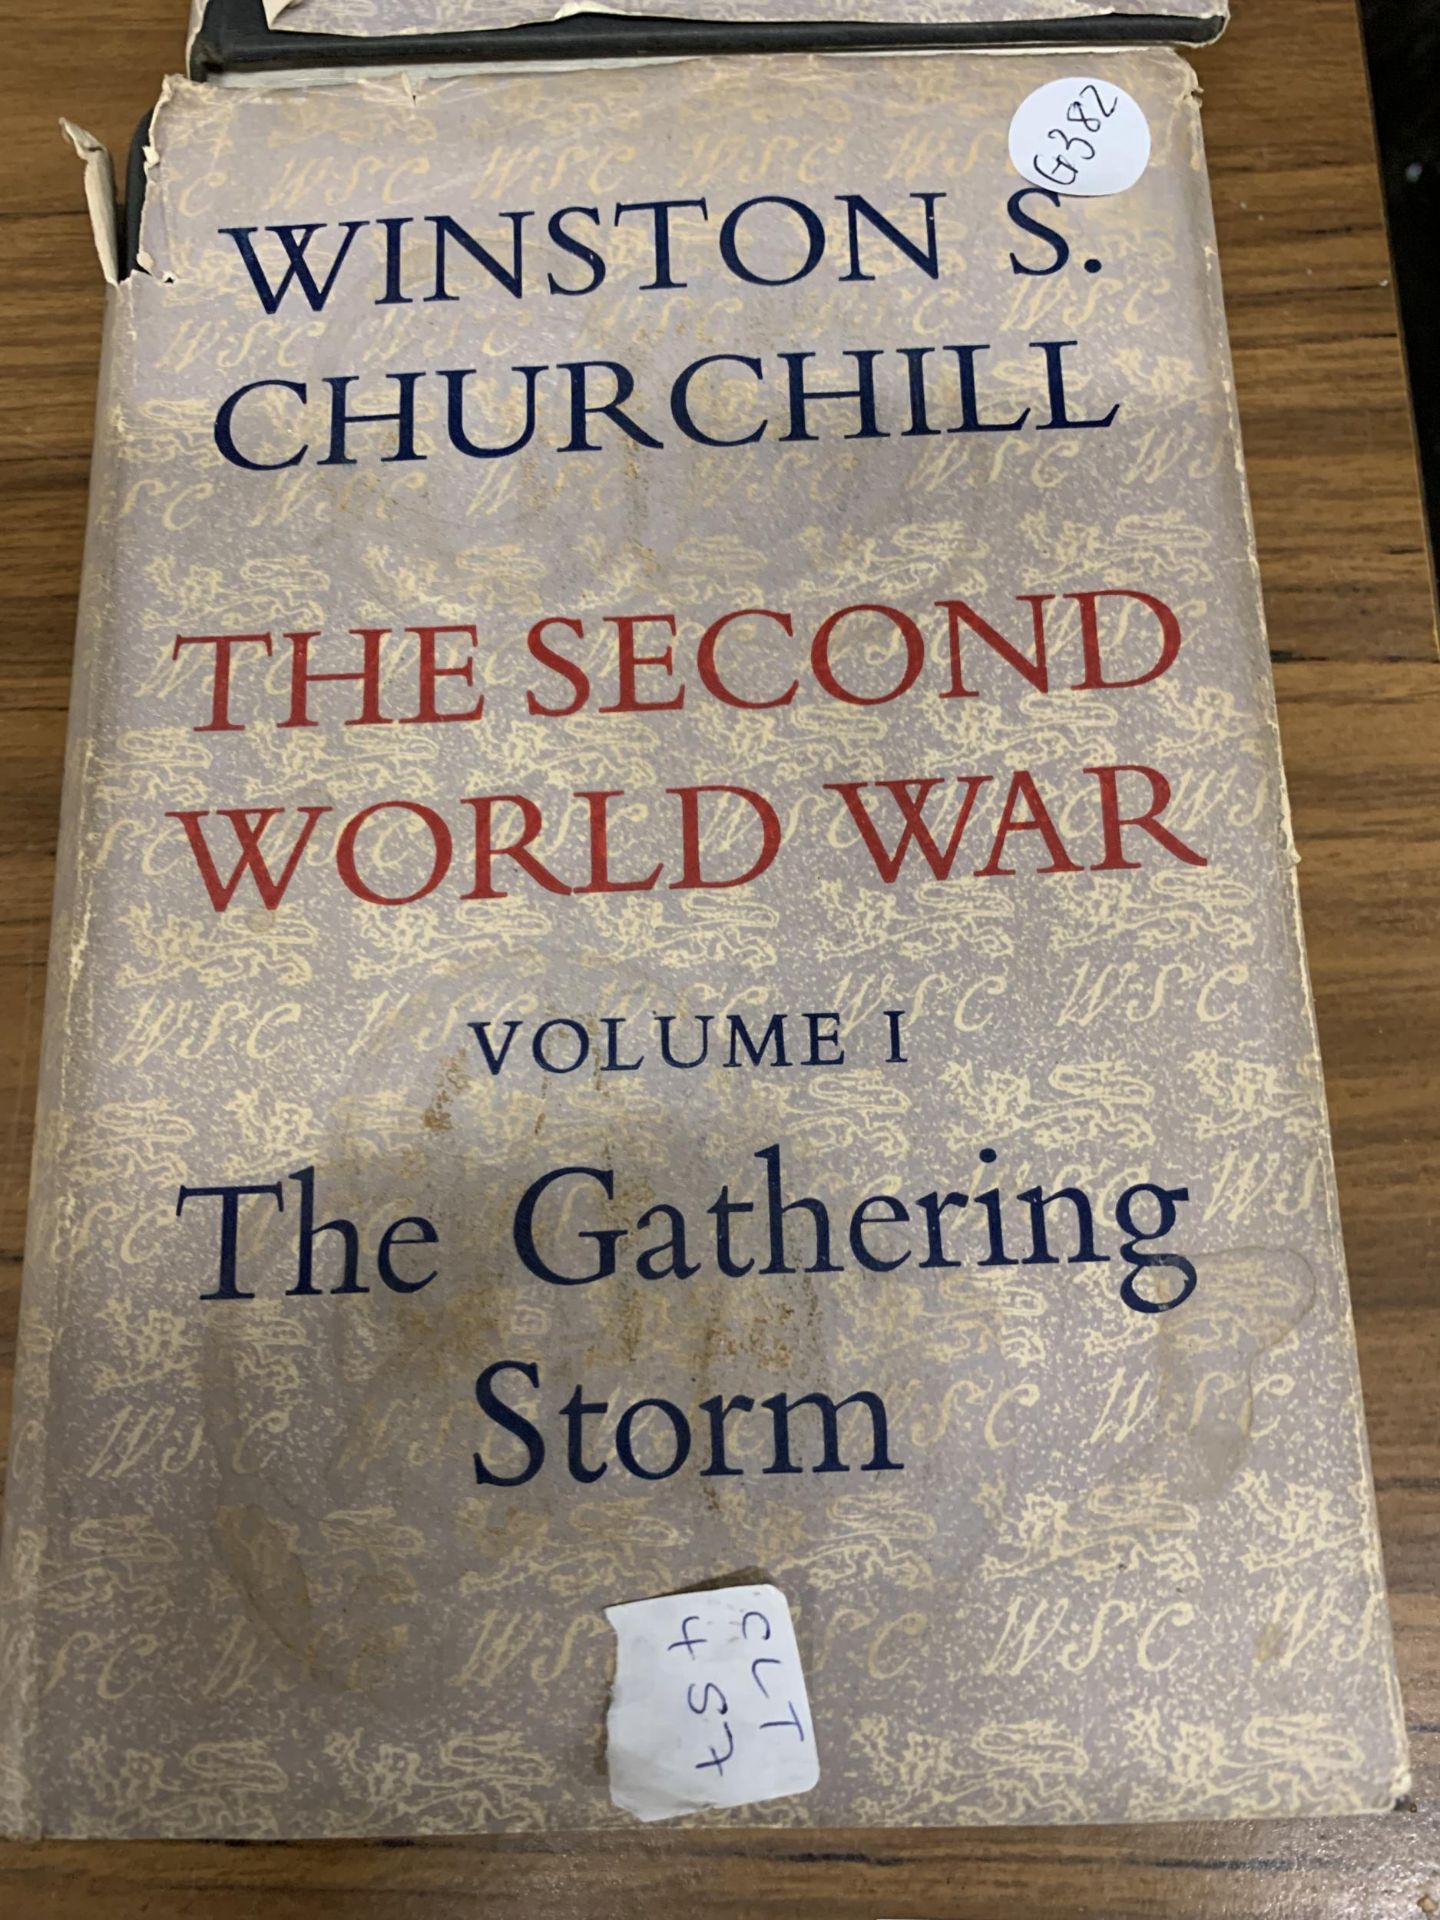 VOLUME 1 AND VOLUME 11 OF THE SECOND WORLD WAR BY WINSTON CHURCHILL - Image 2 of 3